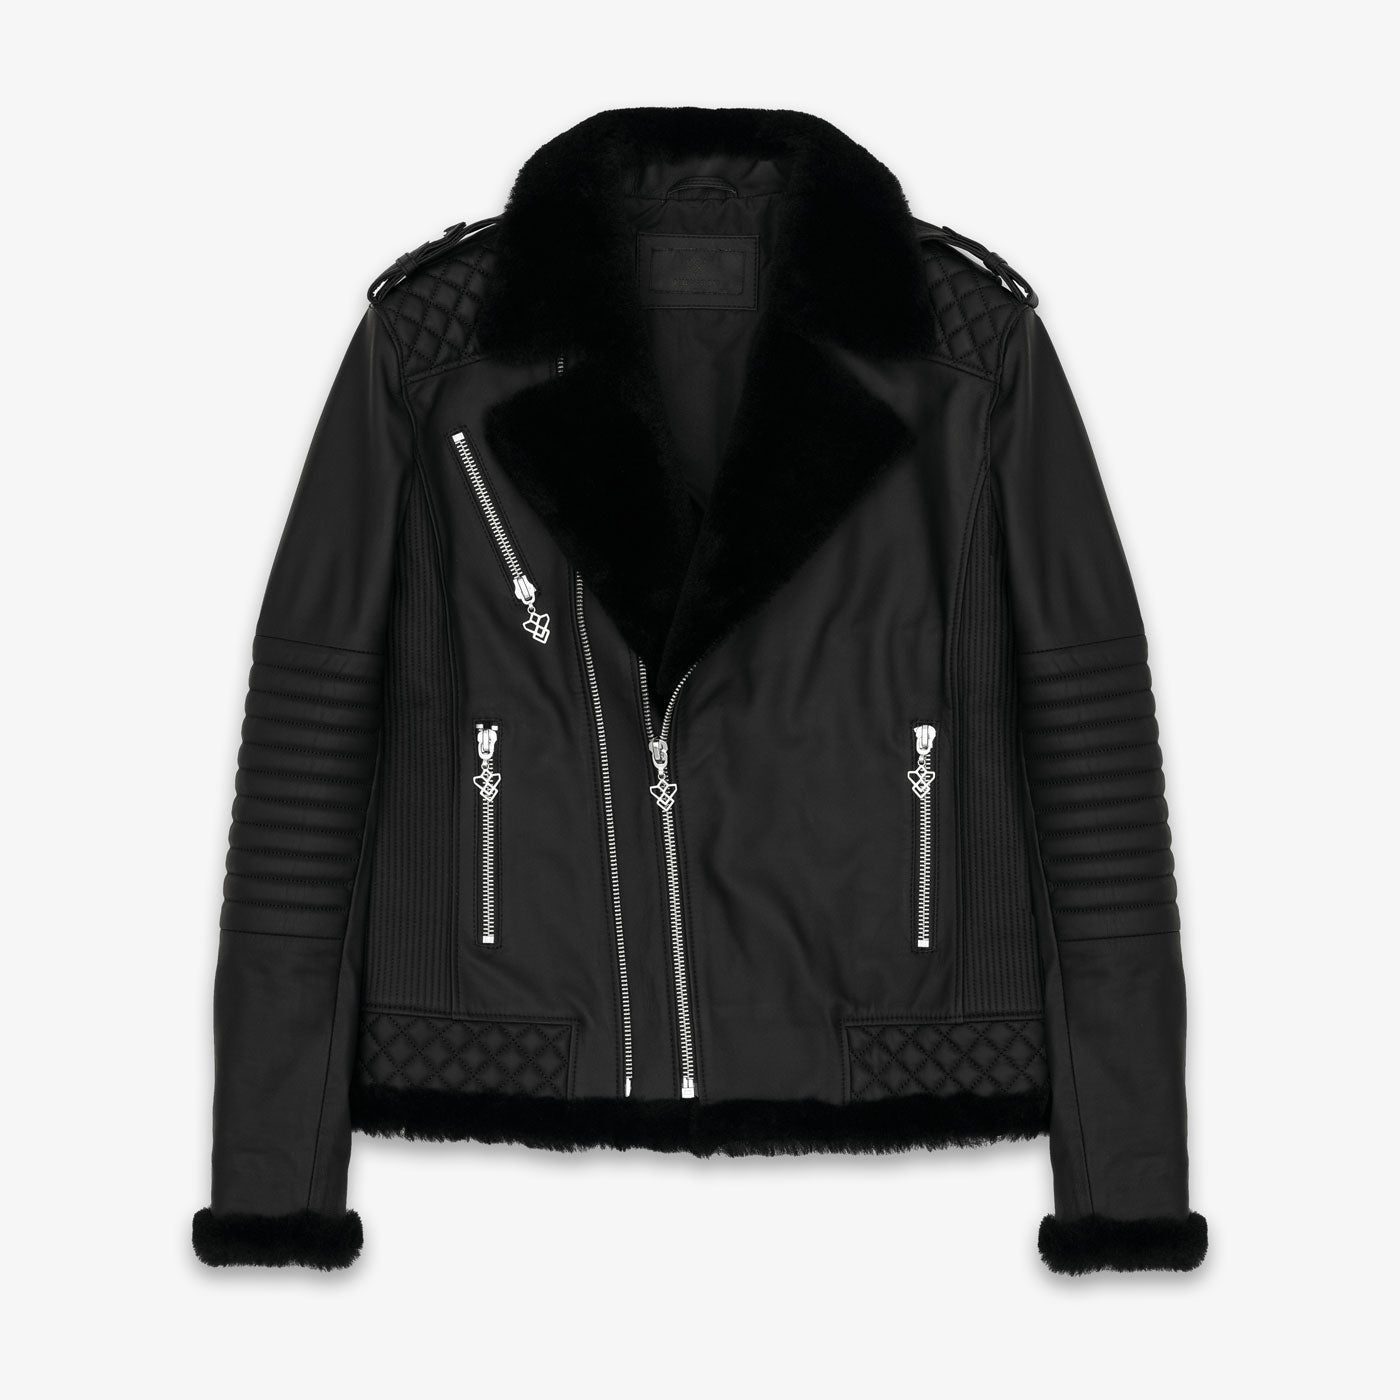 Shearling Panther Black Leather Jacket